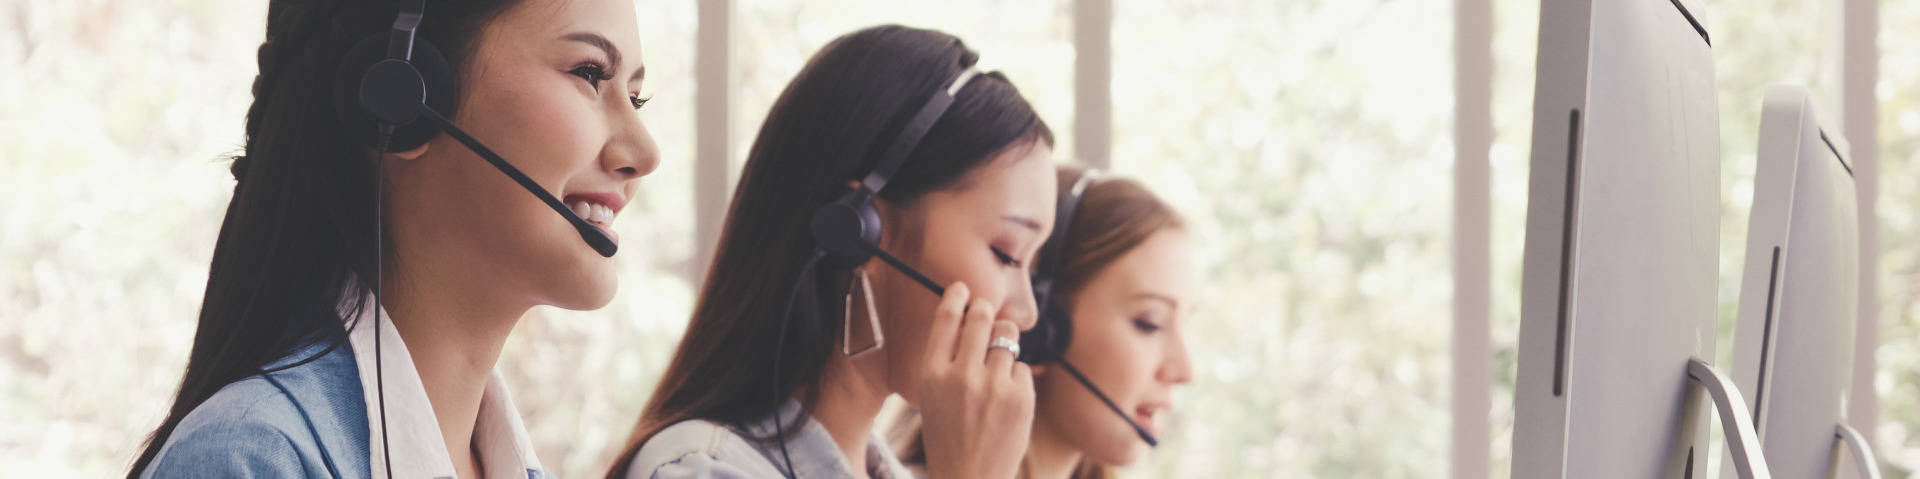 Call centre support